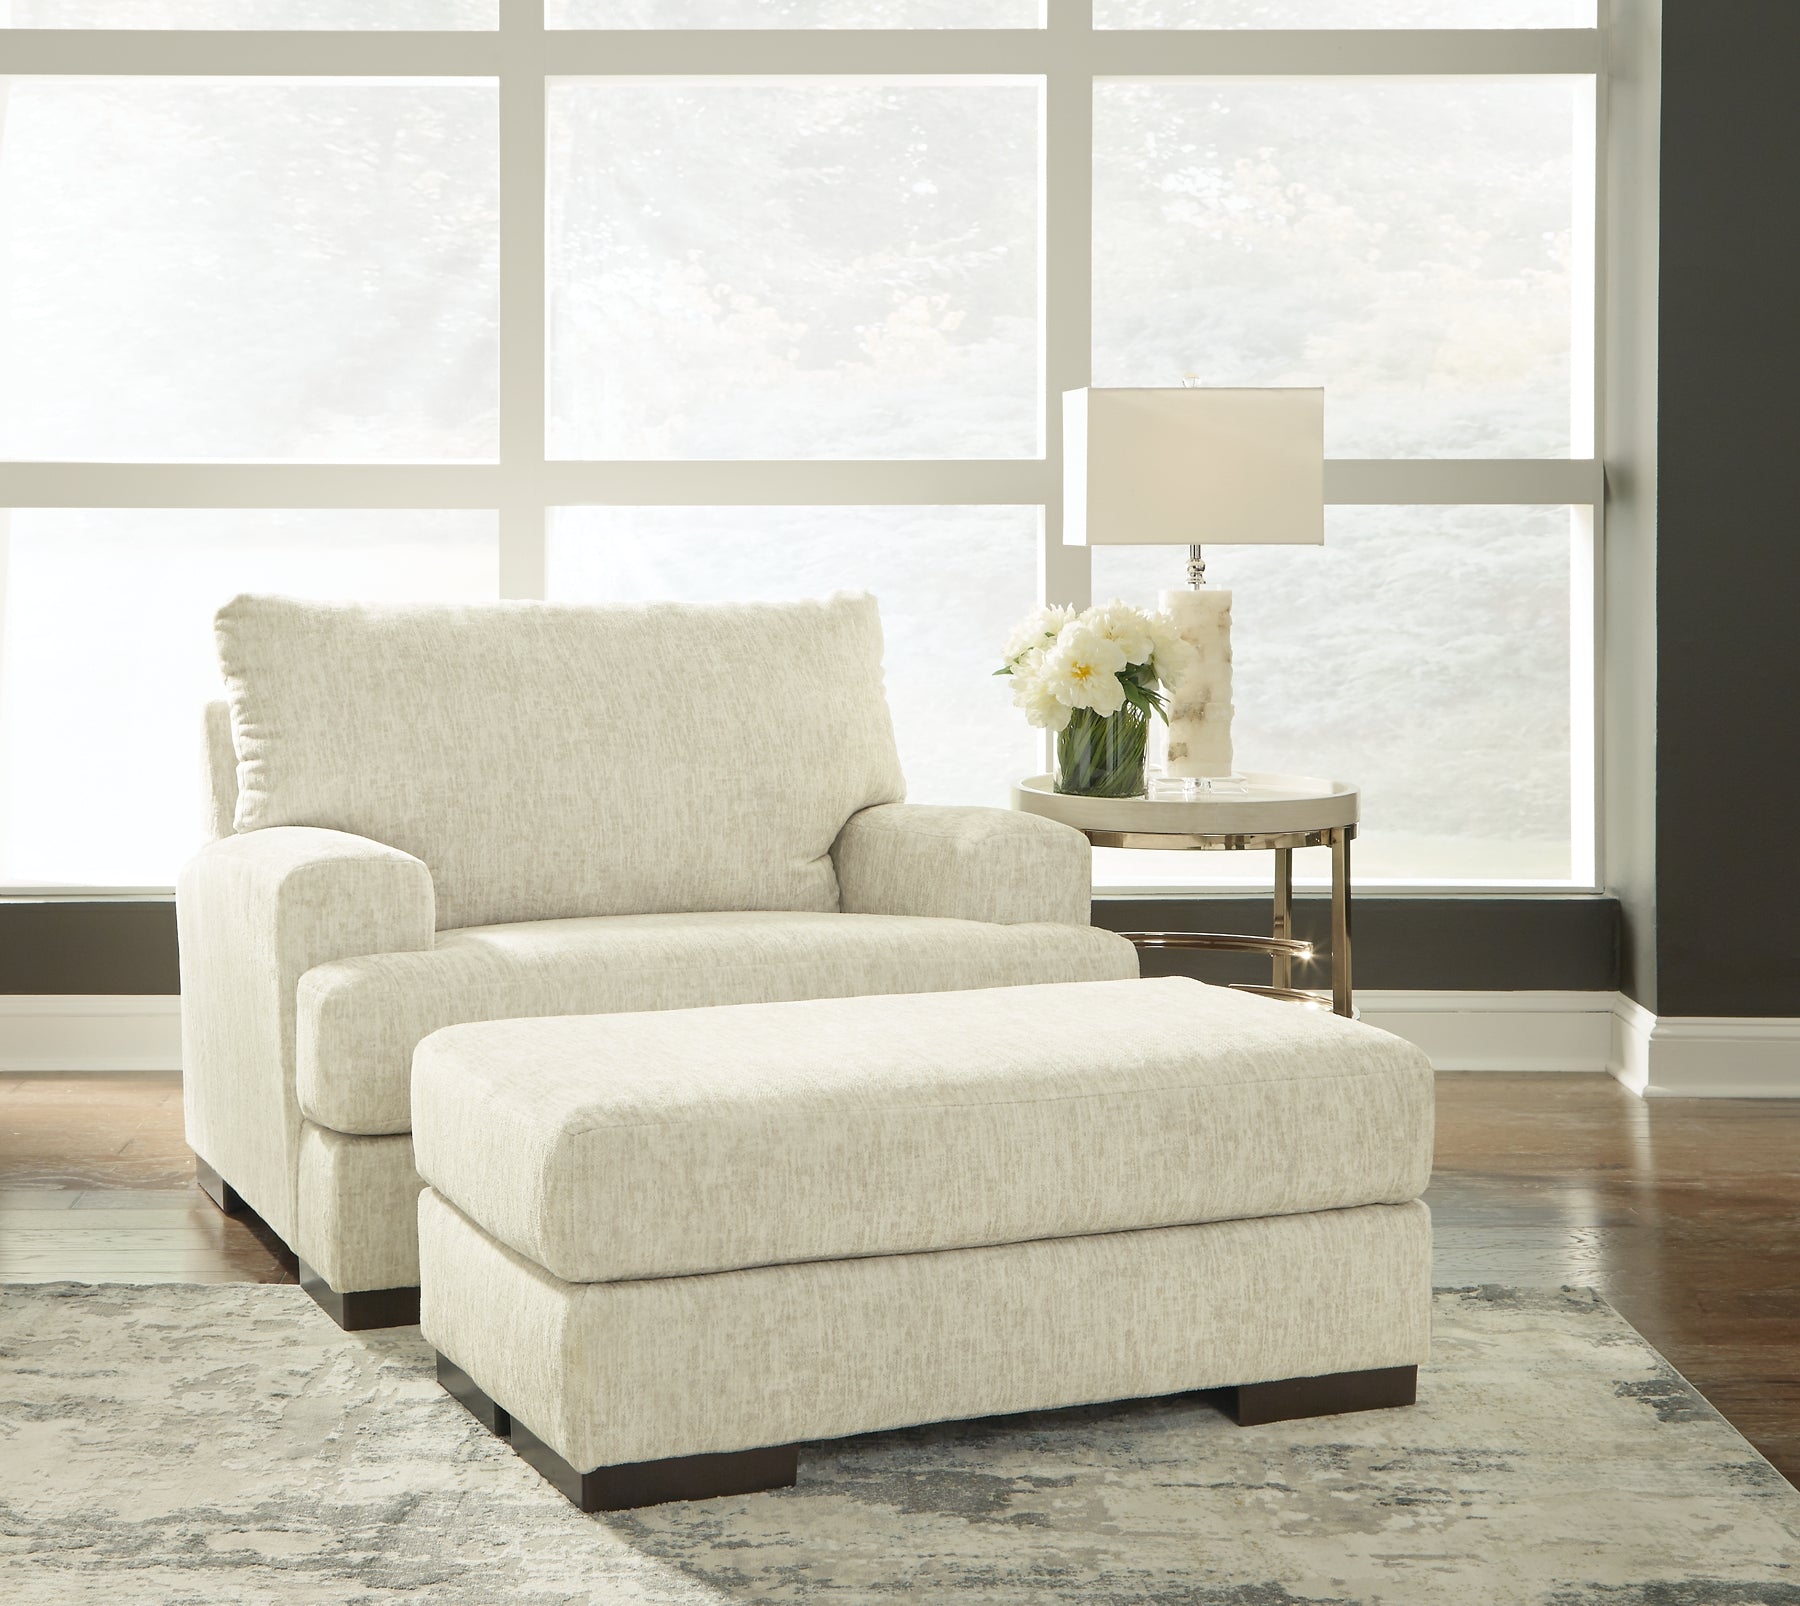 Caretti Sofa, Loveseat, Chair and Ottoman Rent Wise Rent To Own Jacksonville, Florida